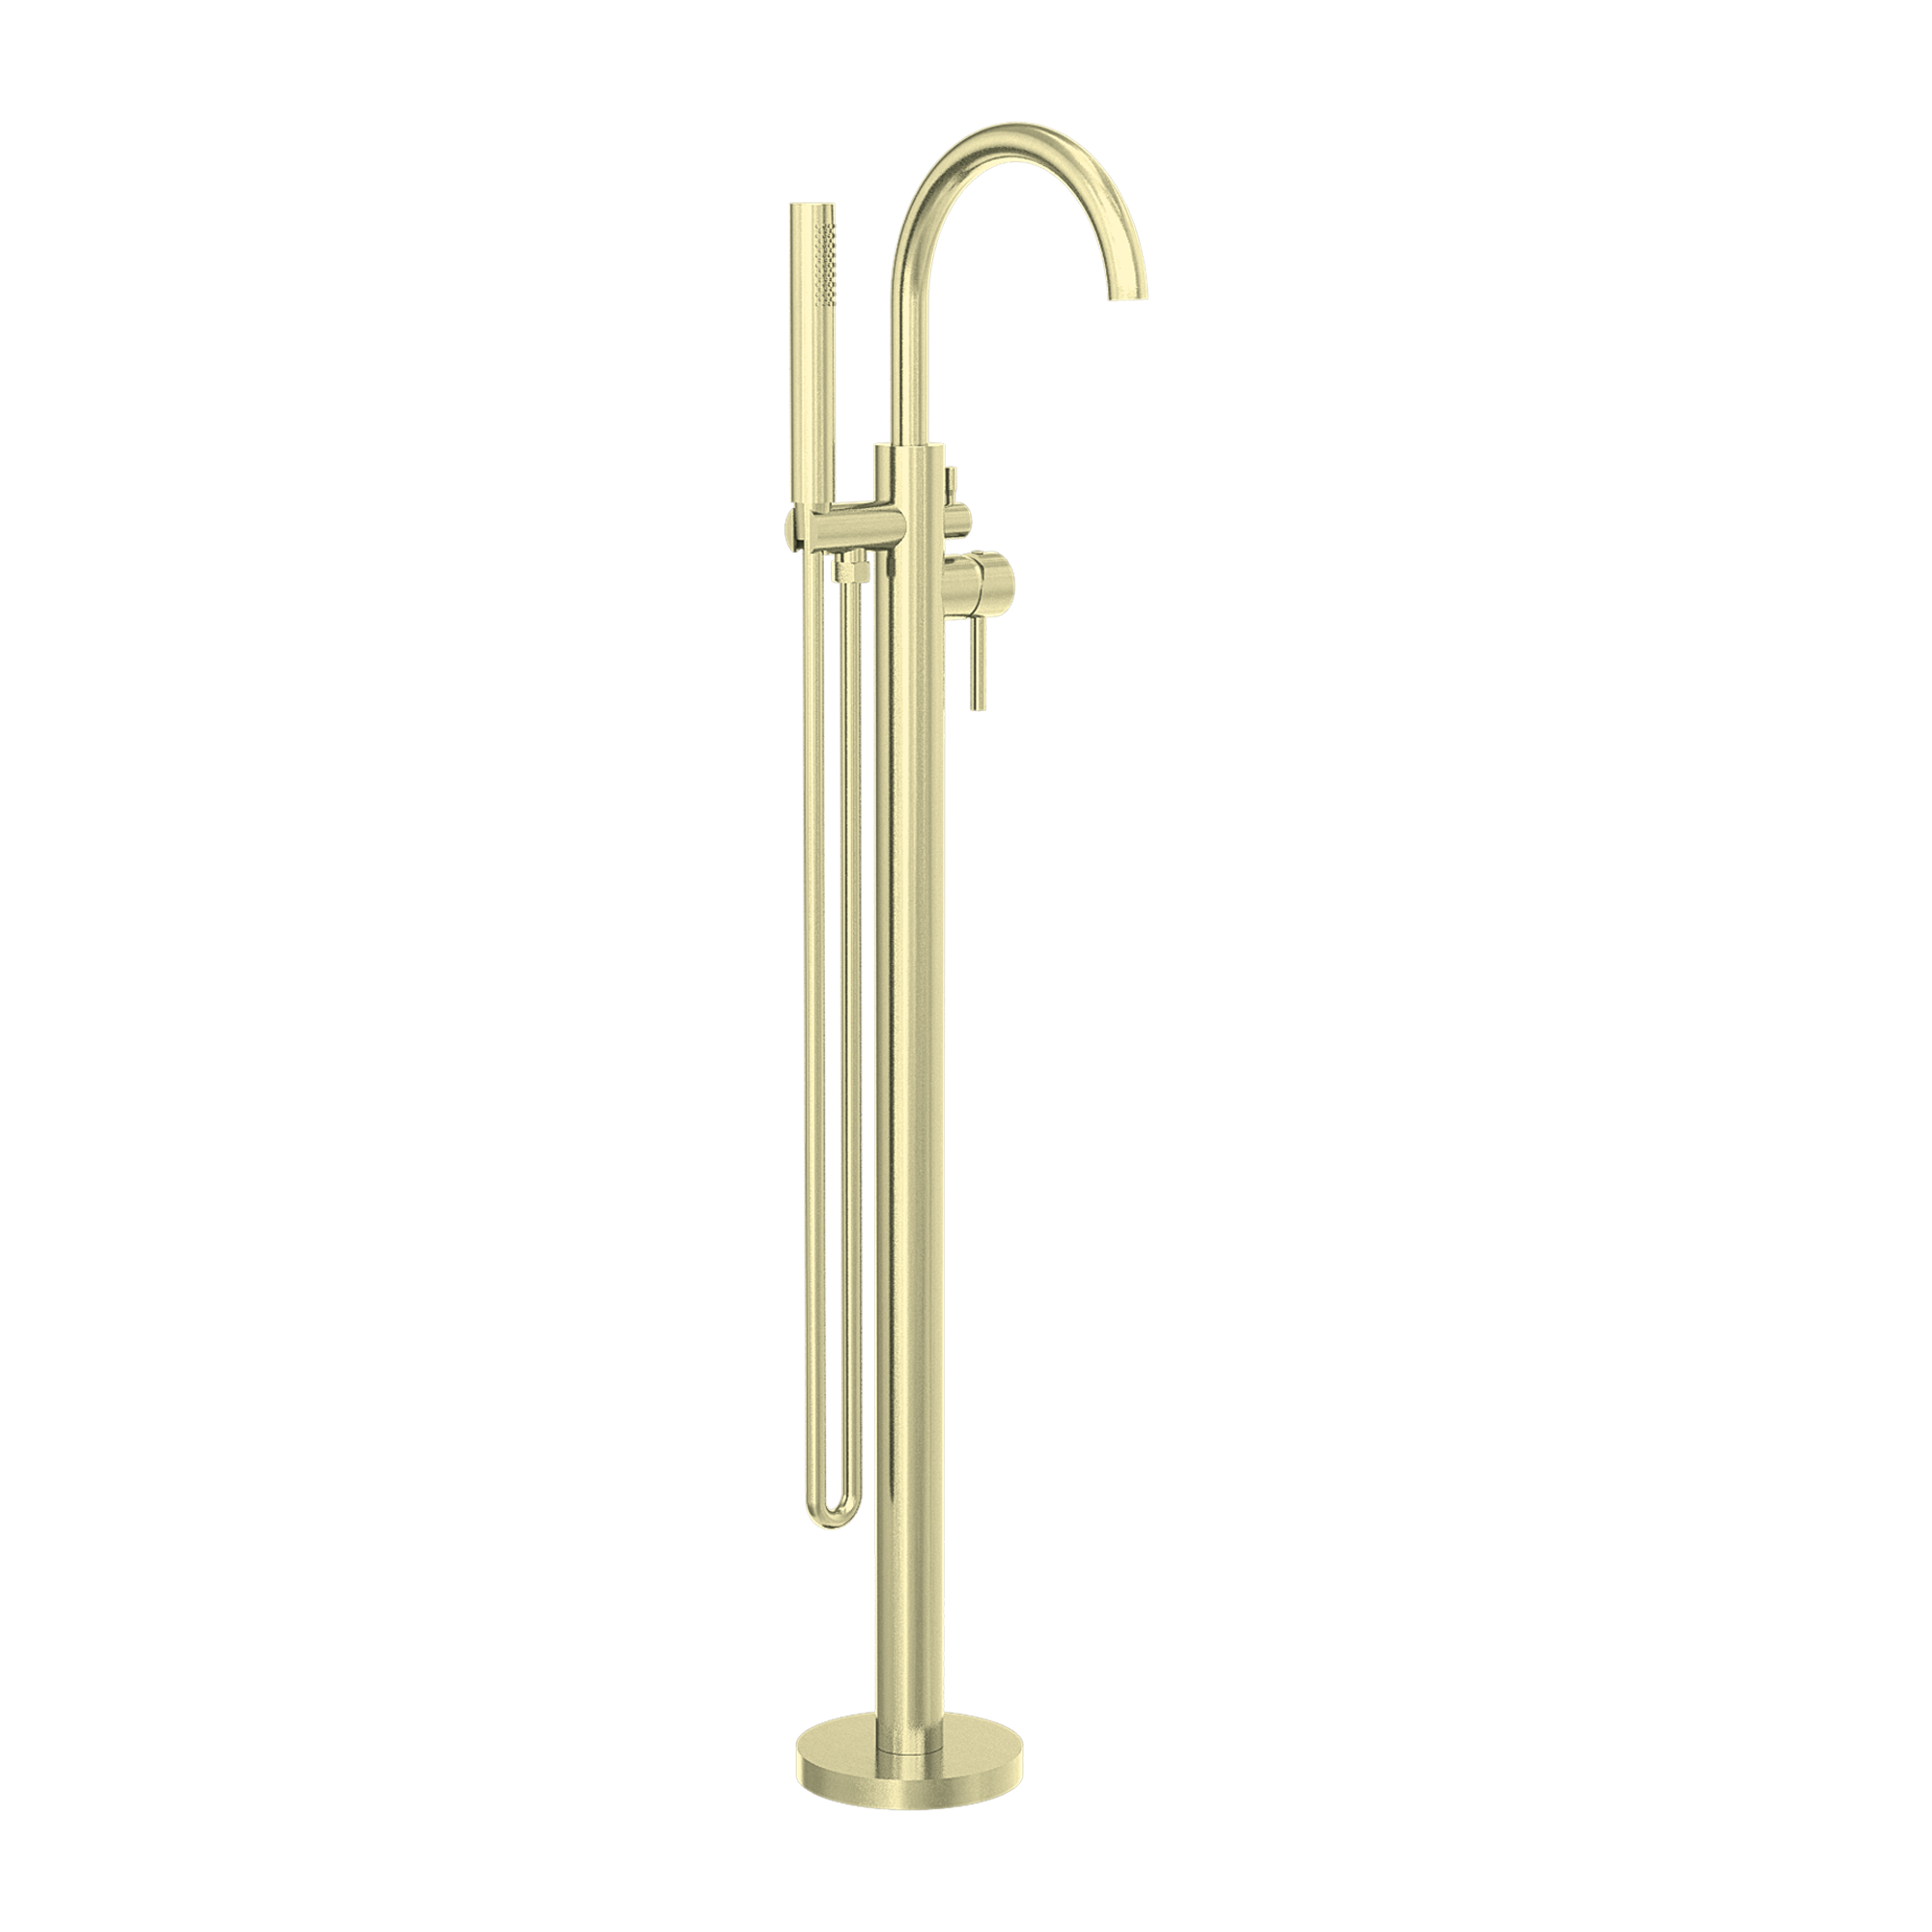 Mecca Round Freestanding Mixer With Hand Shower Brushed Gold - NR210903aBG